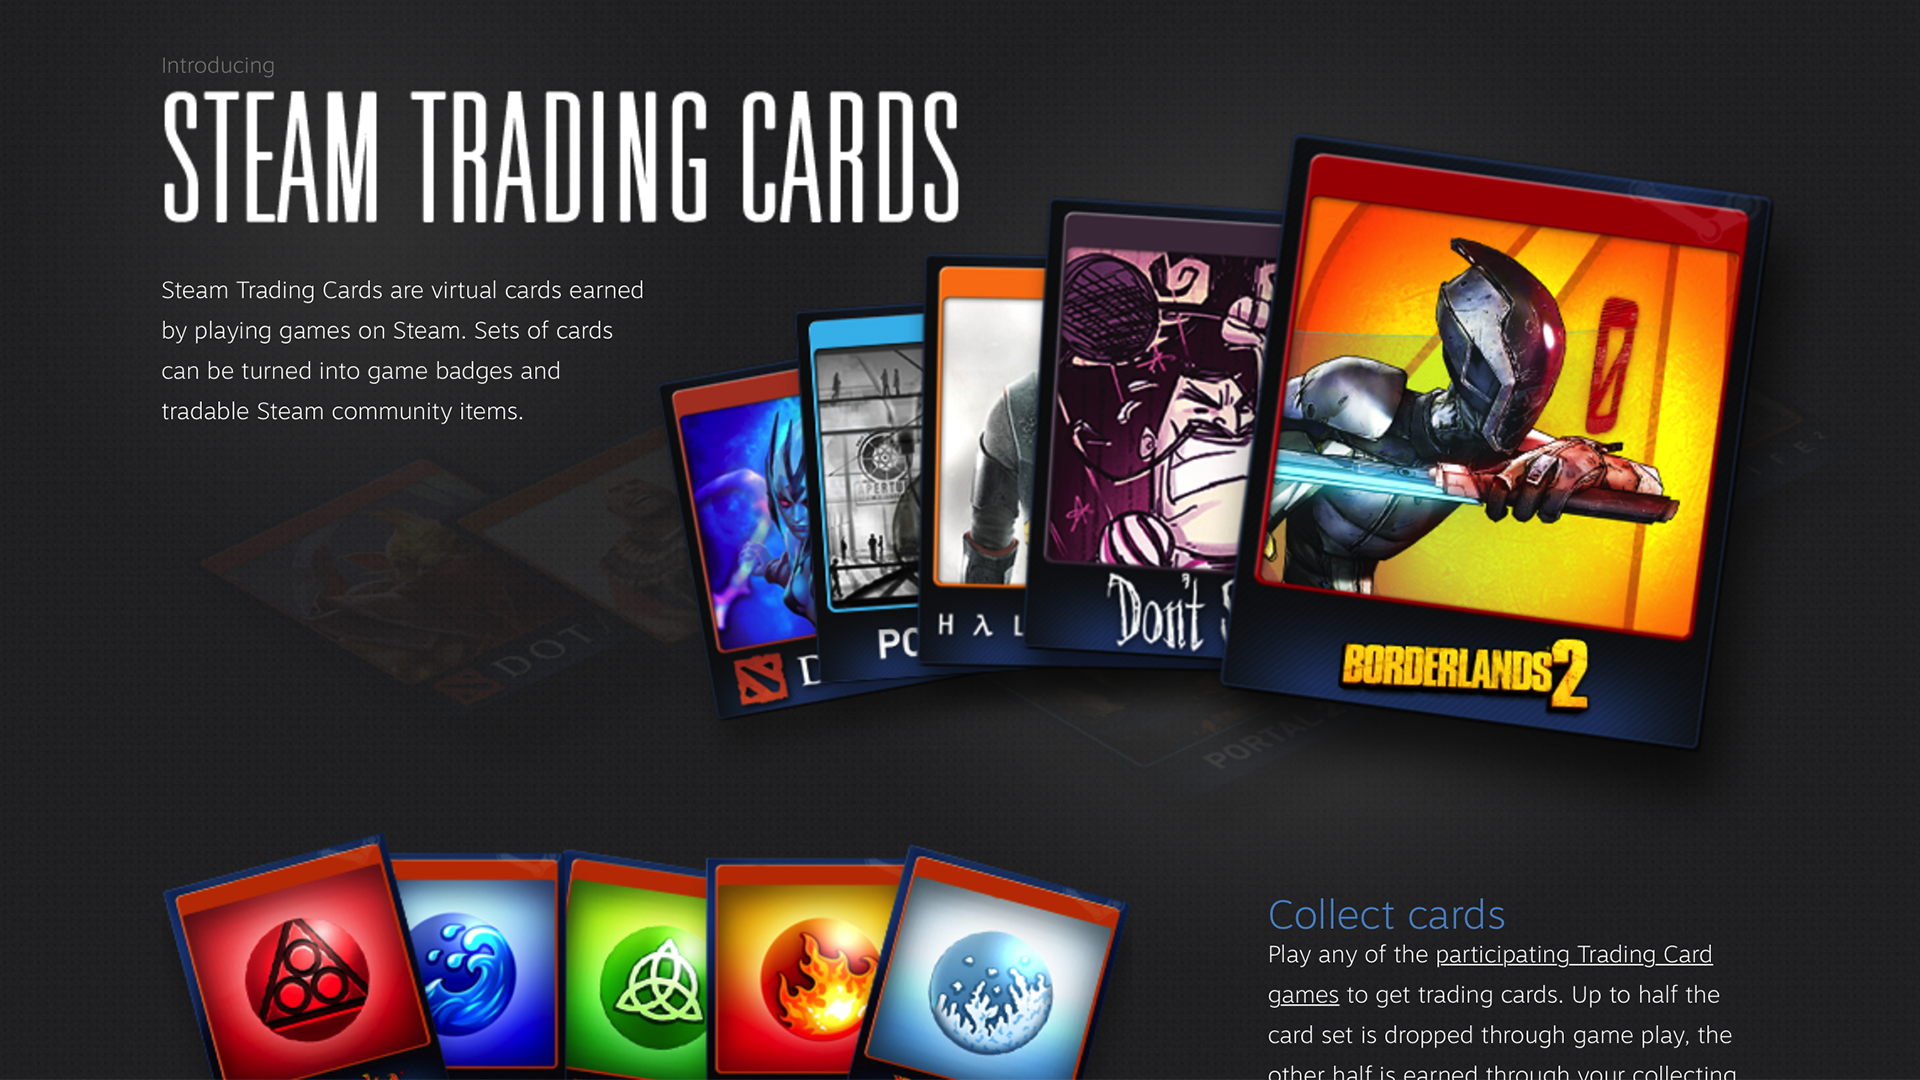 A banner advertising Steam trading cards.